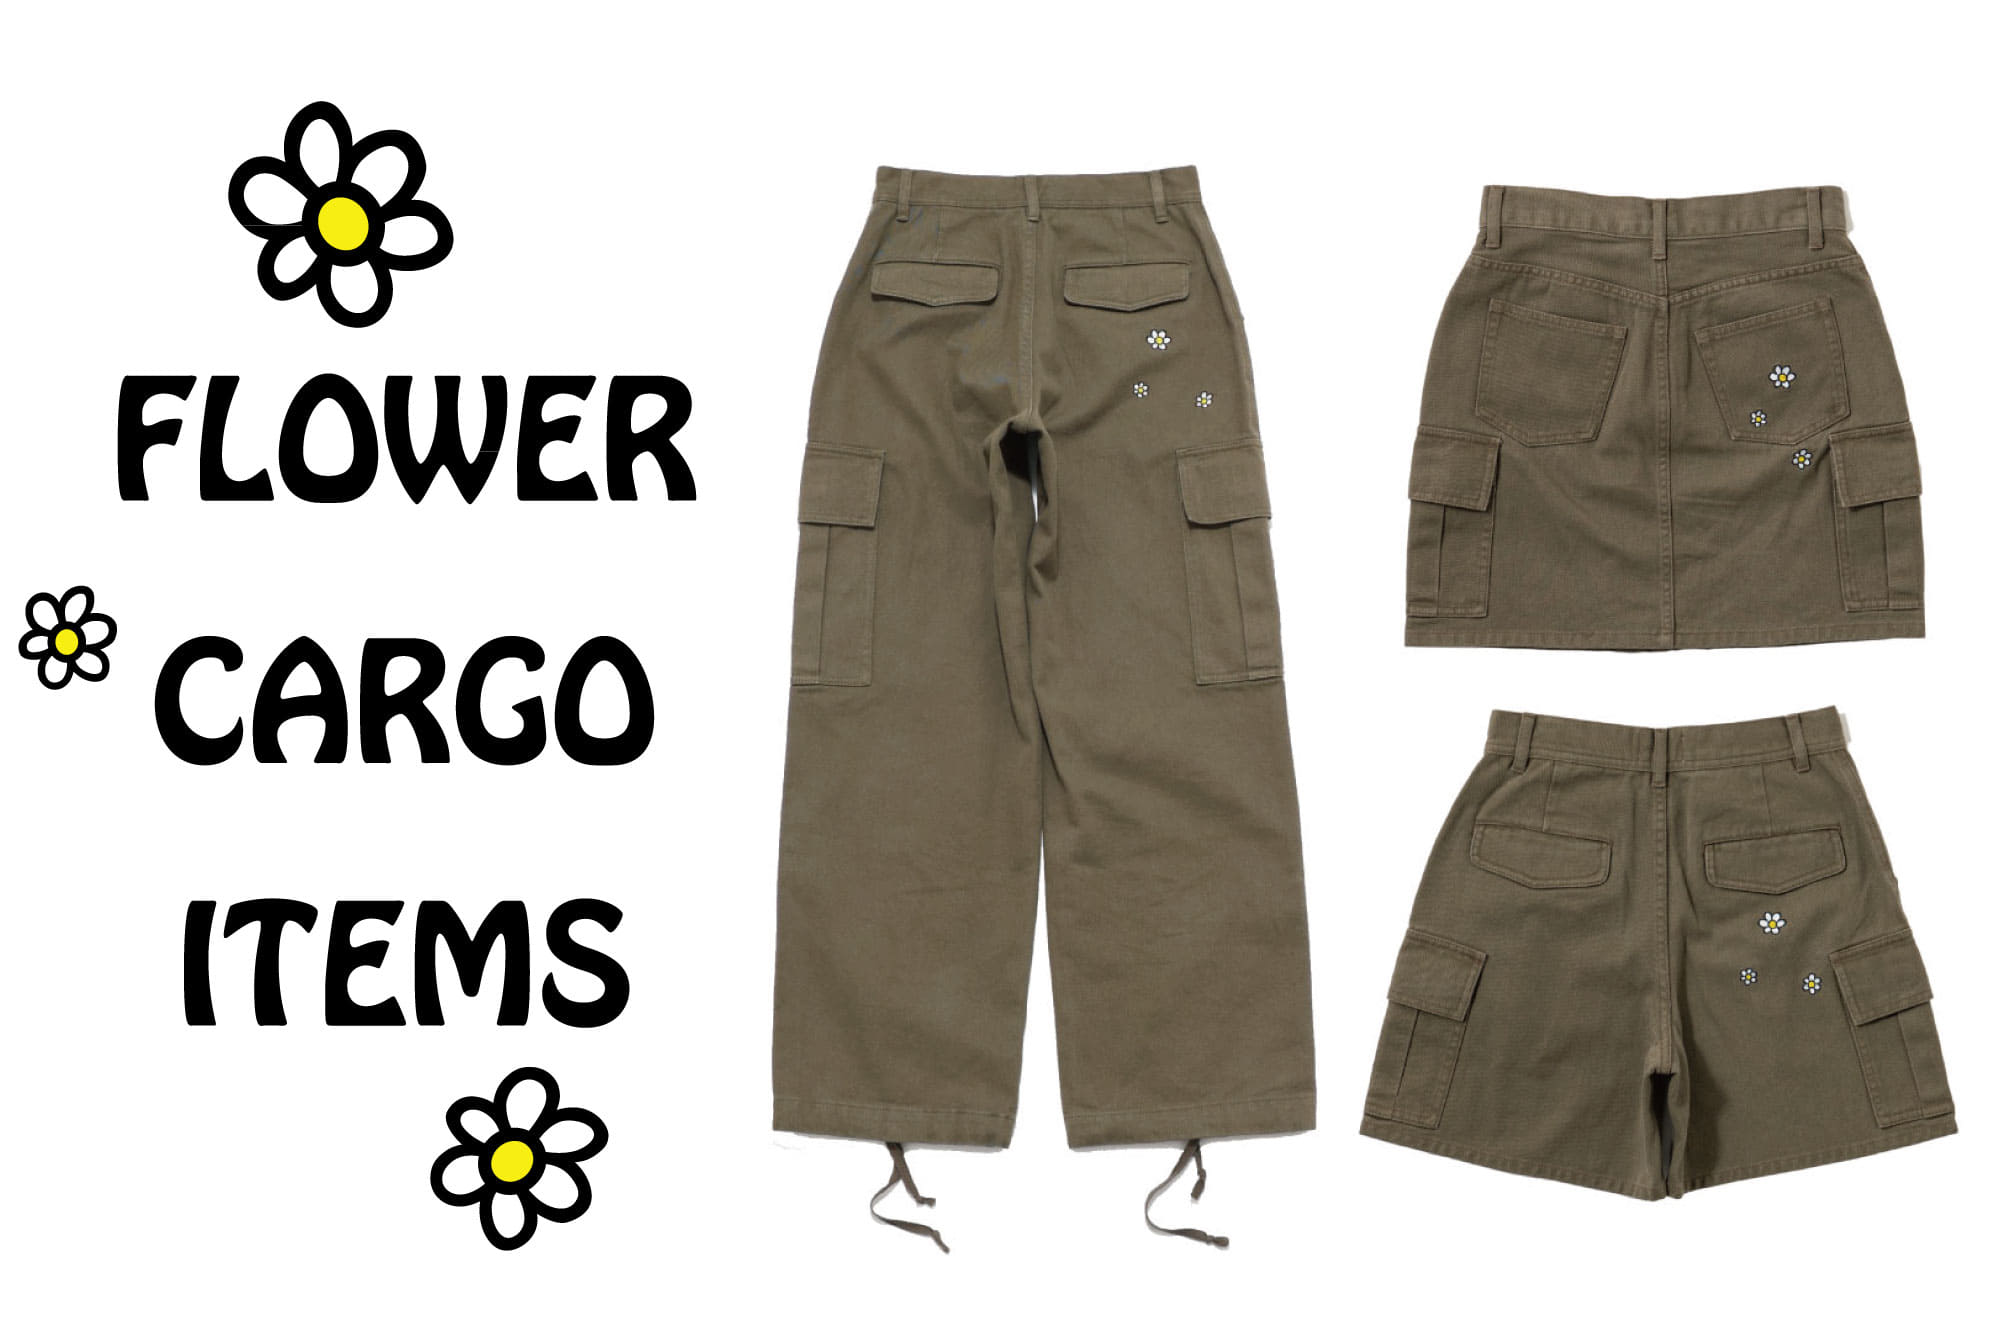 WHO’S WHO gallery 【FLOWER CARGO NEW ITEMS】